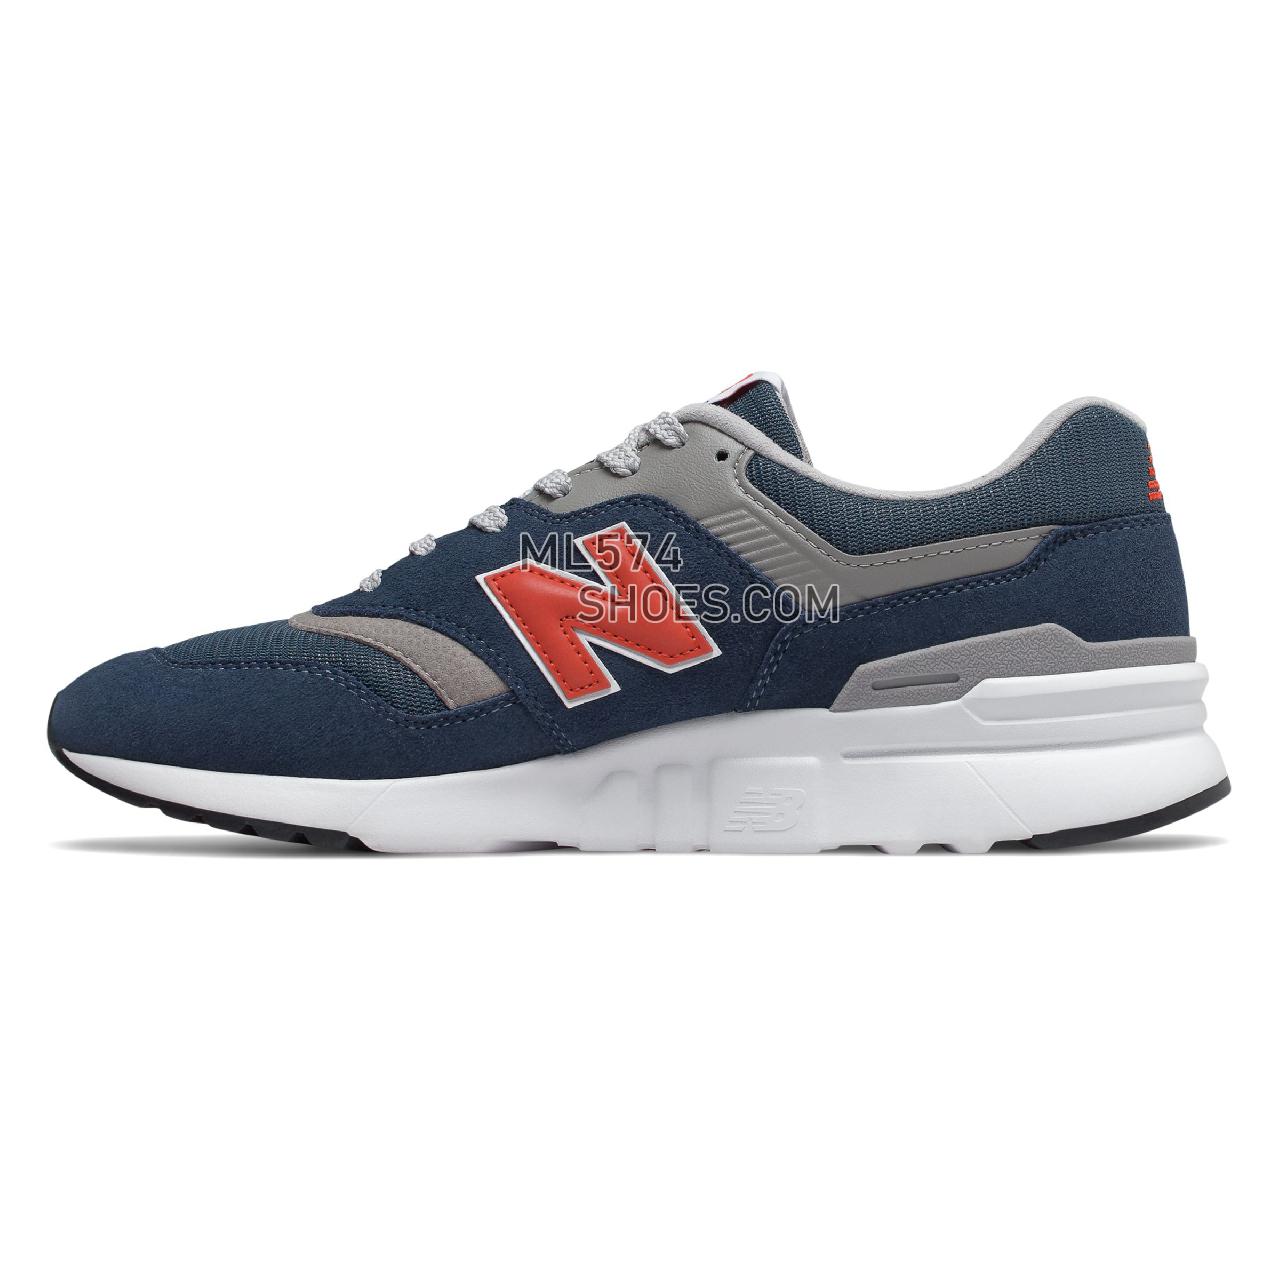 New Balance 997H - Men's Classic Sneakers - Natural Indigo with Neo Flame - CM997HAY